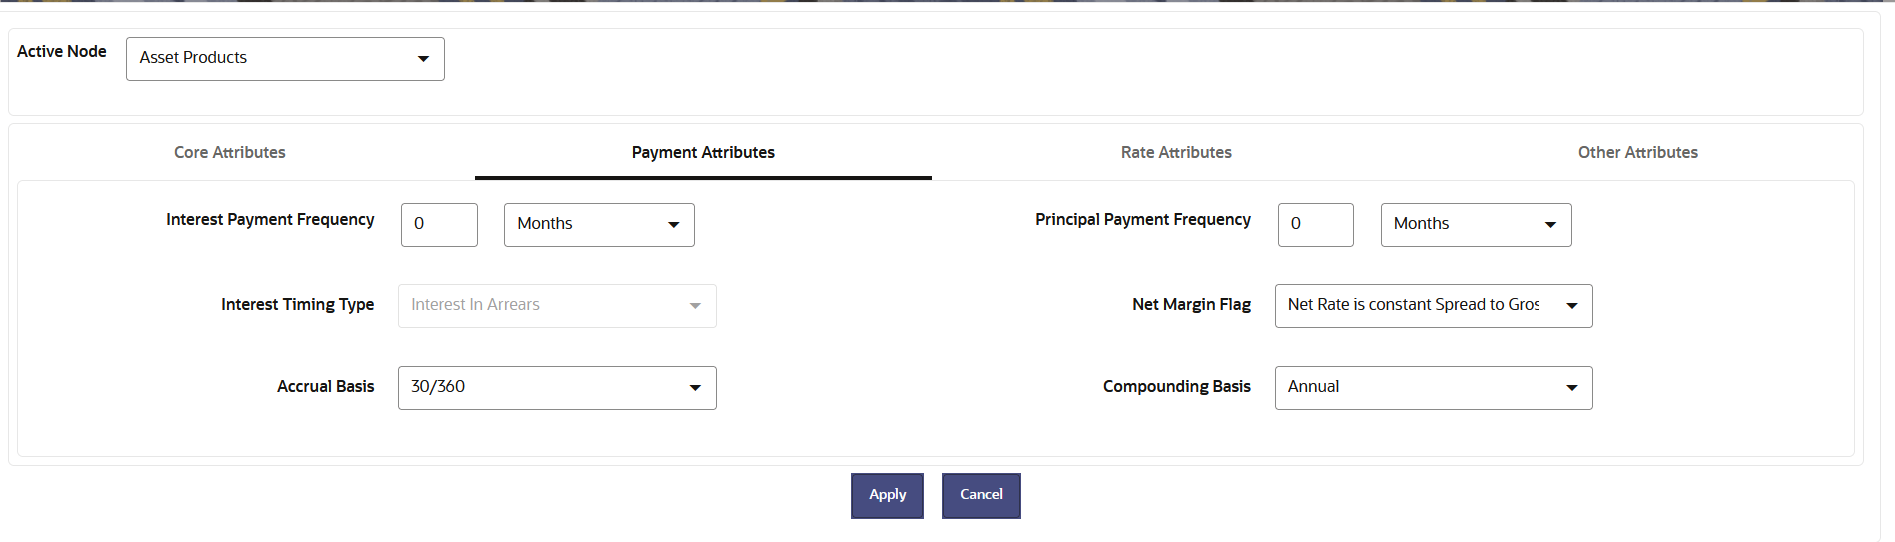 Payment Attributes Tab to Define the Product Characteristic Rule